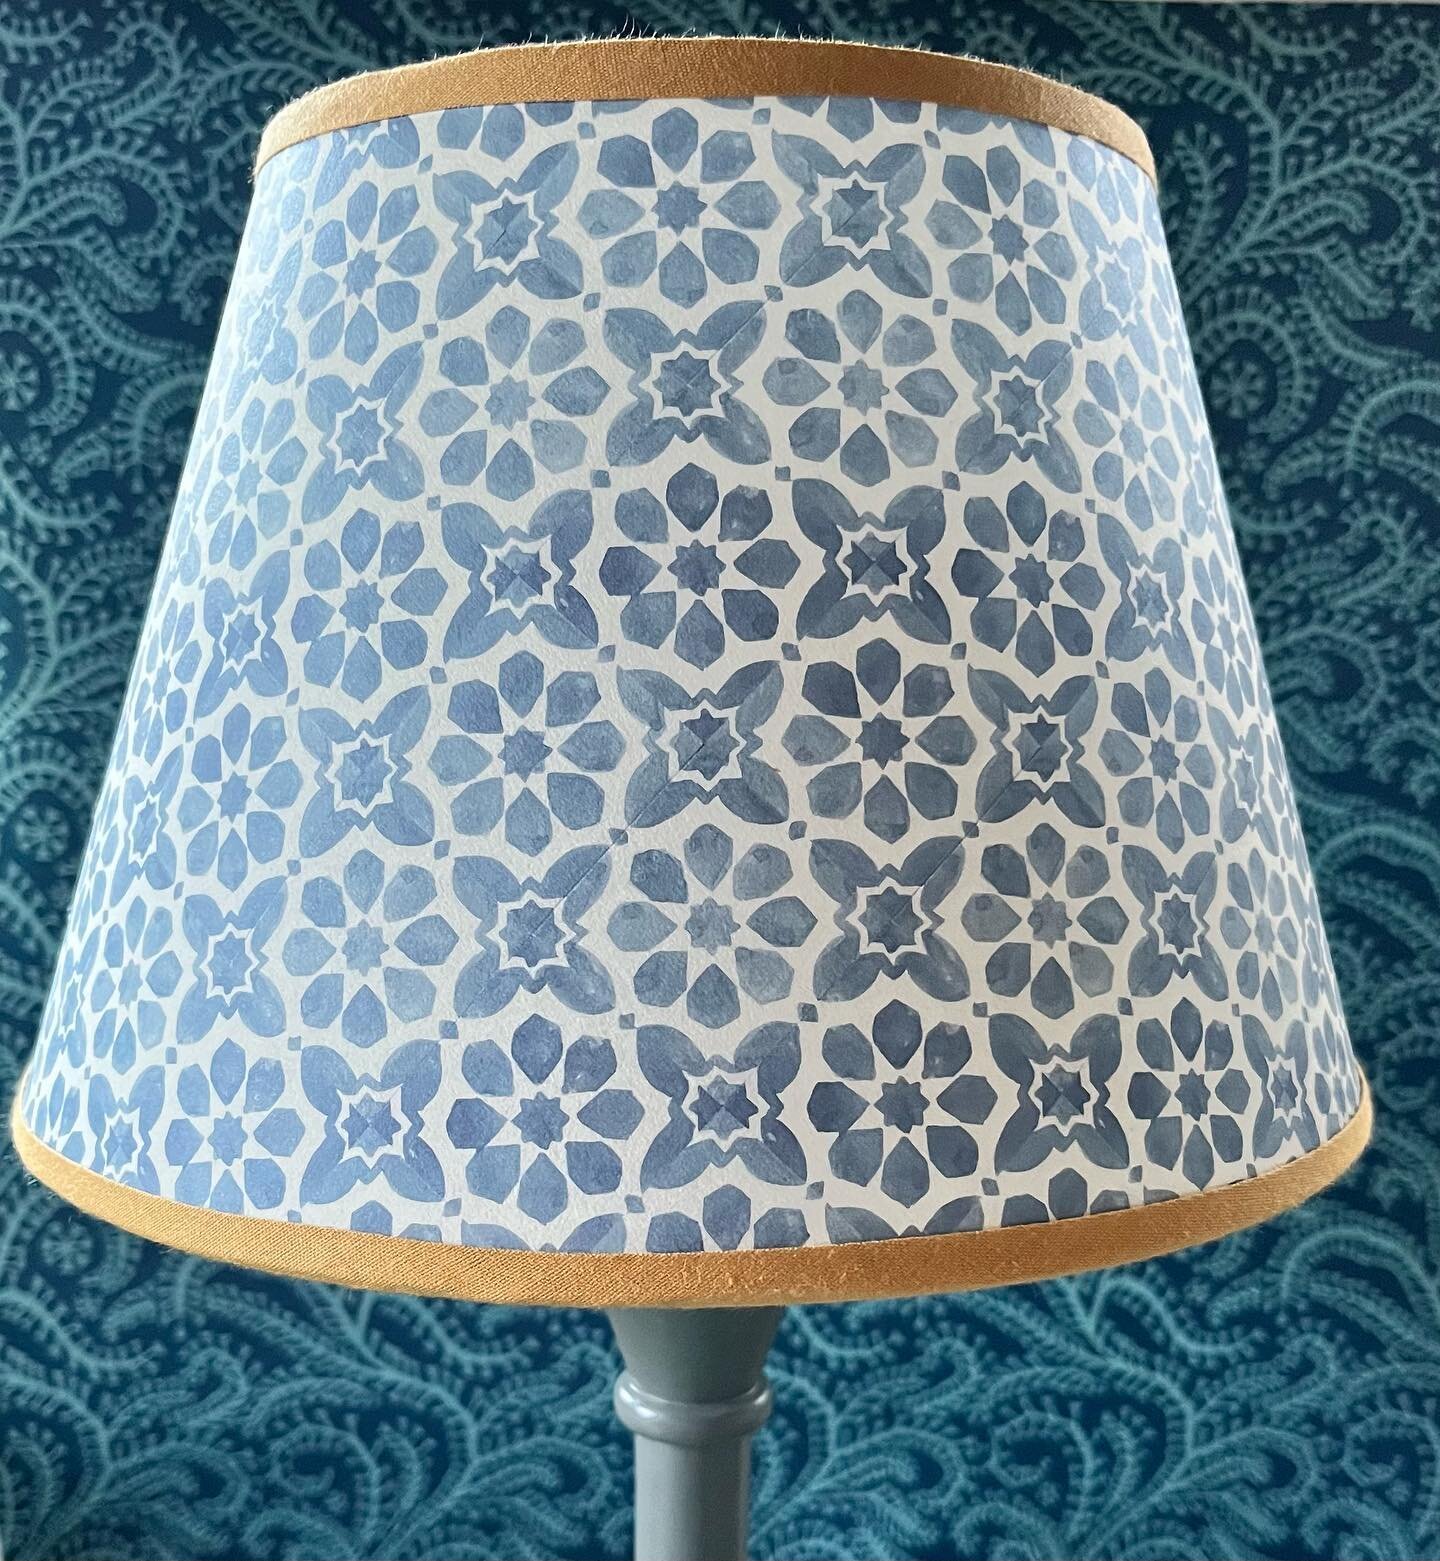 I love all things @wanderlustpaperco - the quality of the paper is superb and makes perfect paper lampshades. Adding a bias trim gives a great finishing touch 💛💙💛
Come and make a drum lampshade with me on 17th December at @clothkits - yours will b